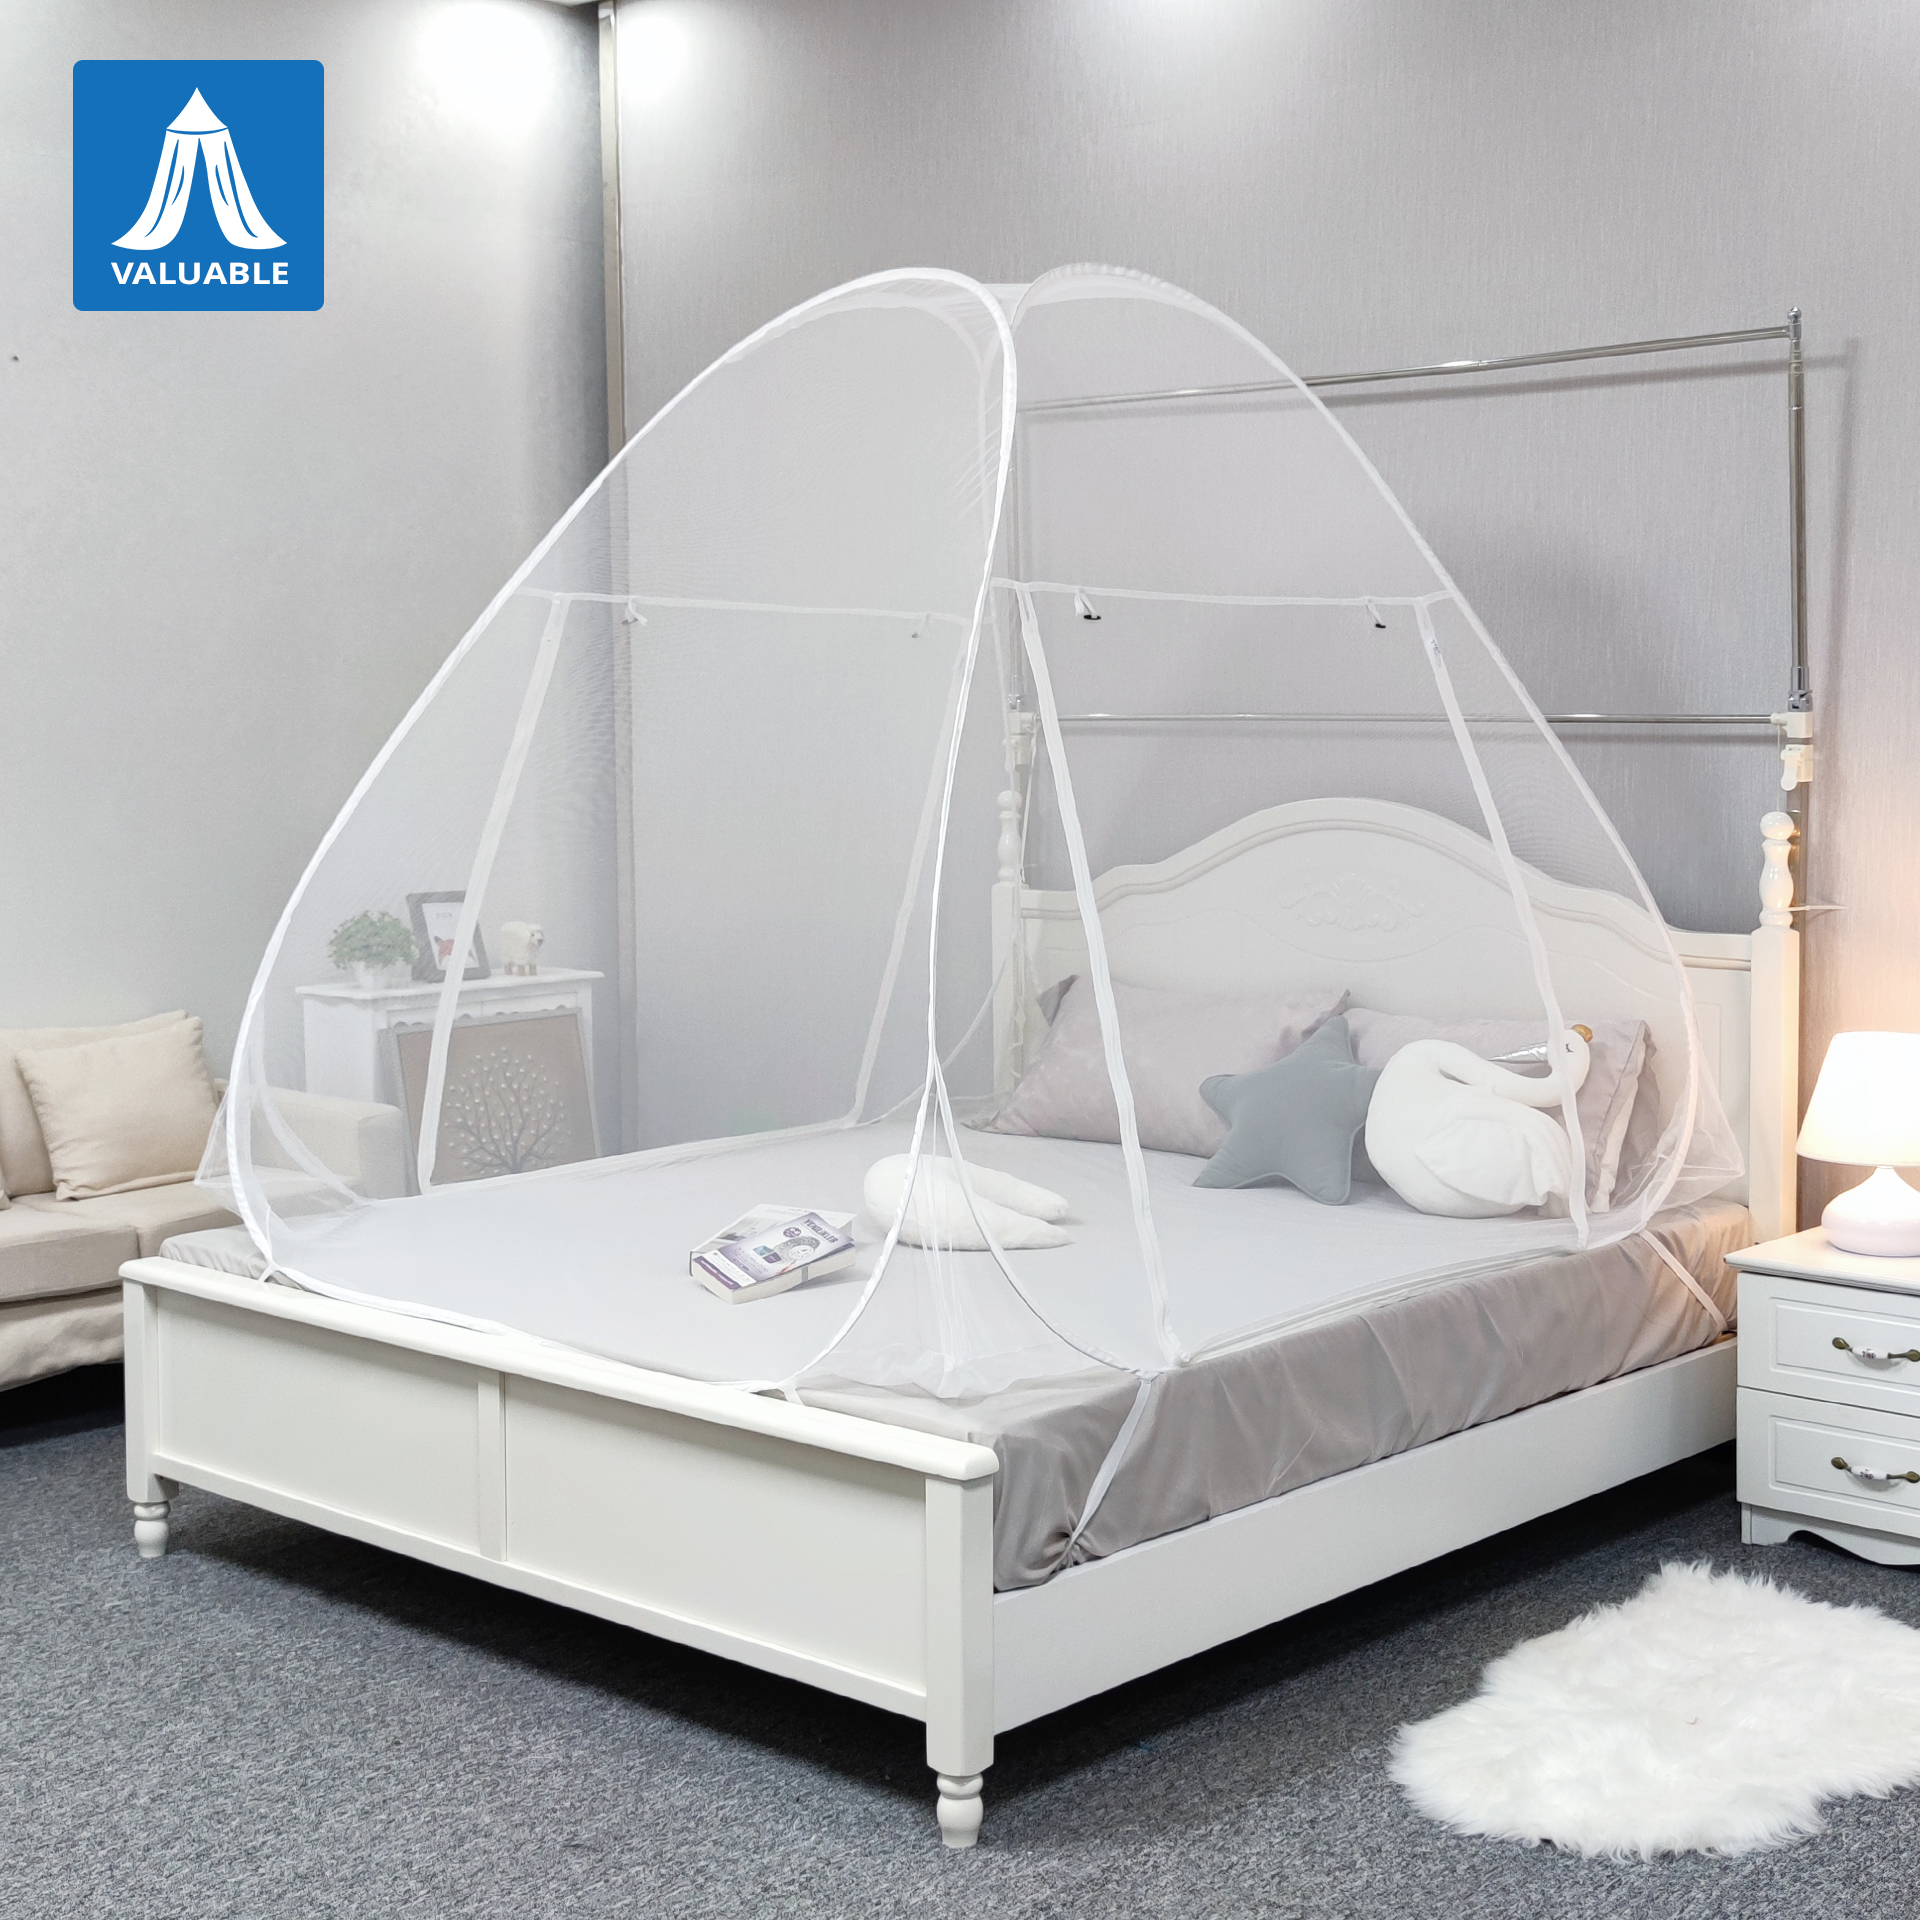 Anti Mosquito Nets Portable Mosquito Net Bed Tent With Bottom Folding Mosquito Nettings